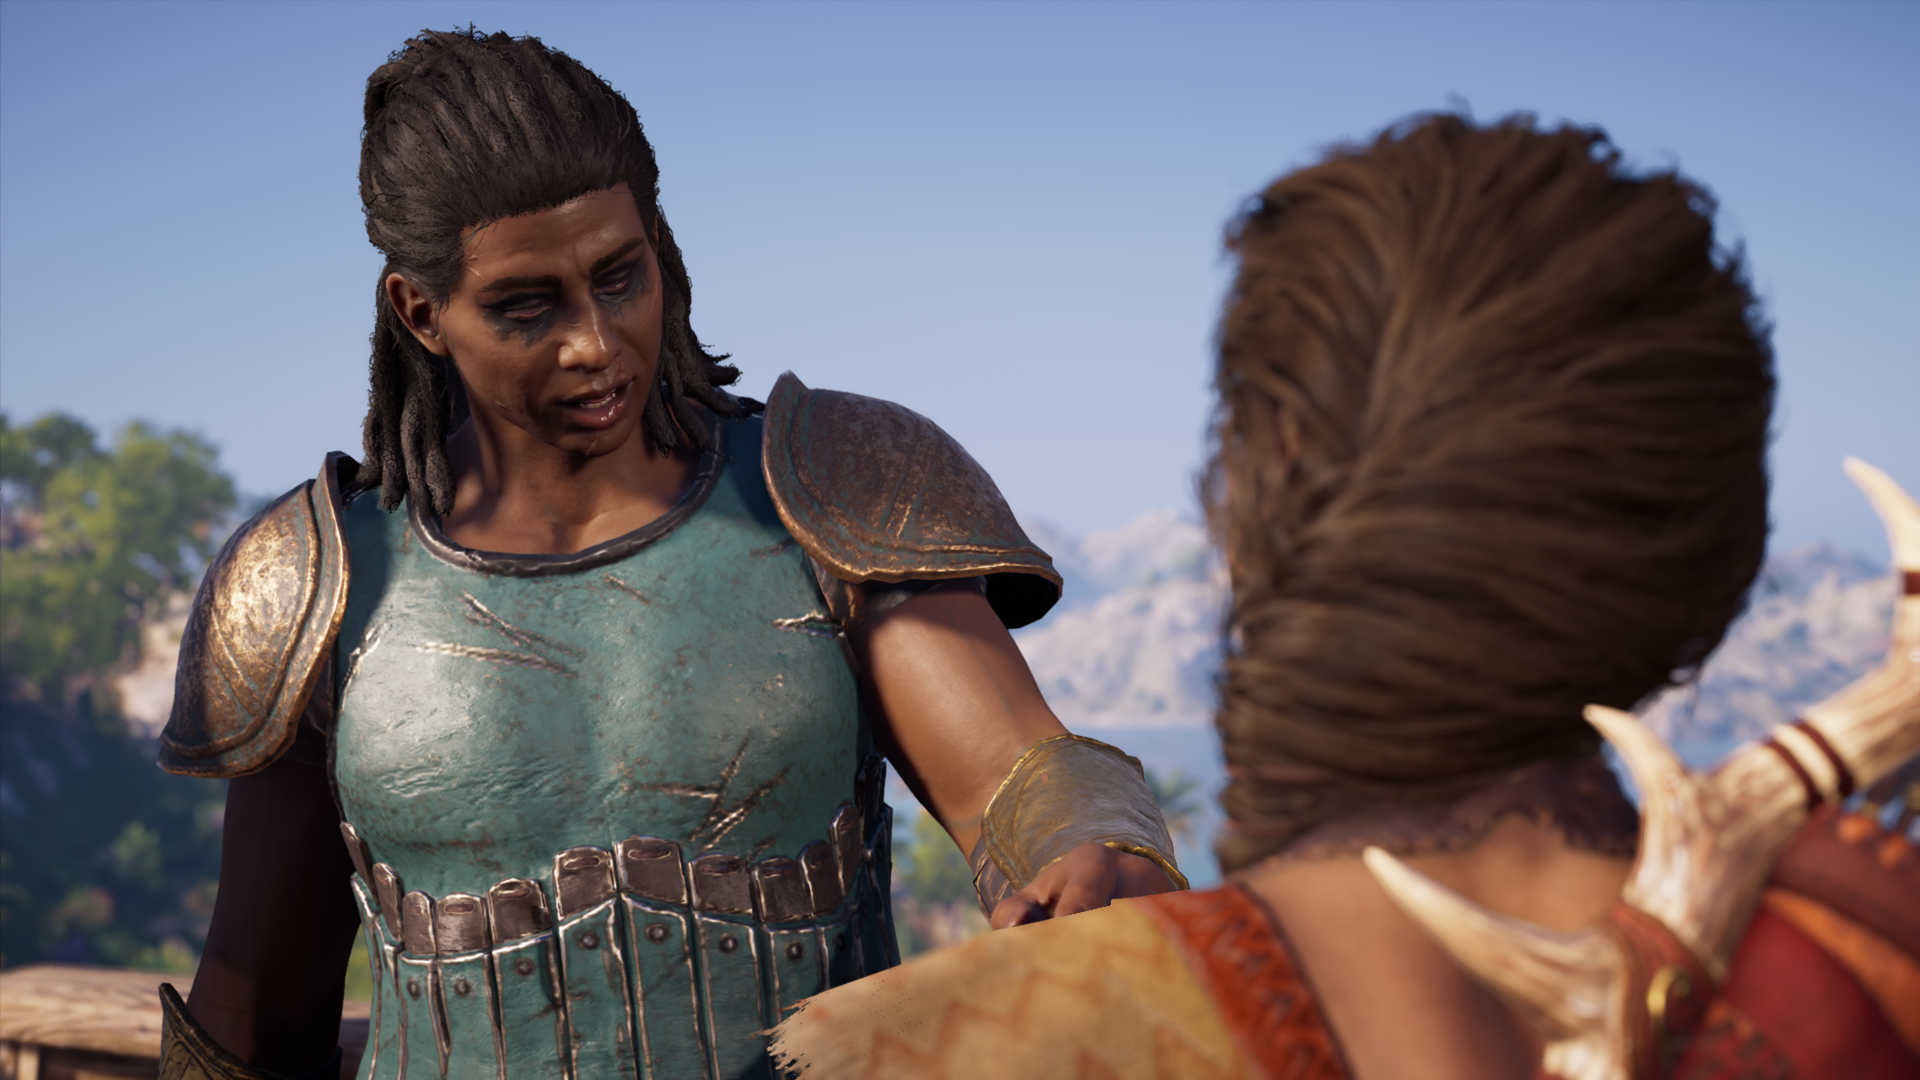 Assassins Creed Odyssey  Acquire The Makedonian Bracelet For Xenia   Sacred Vows  Xenia Quest  YouTube